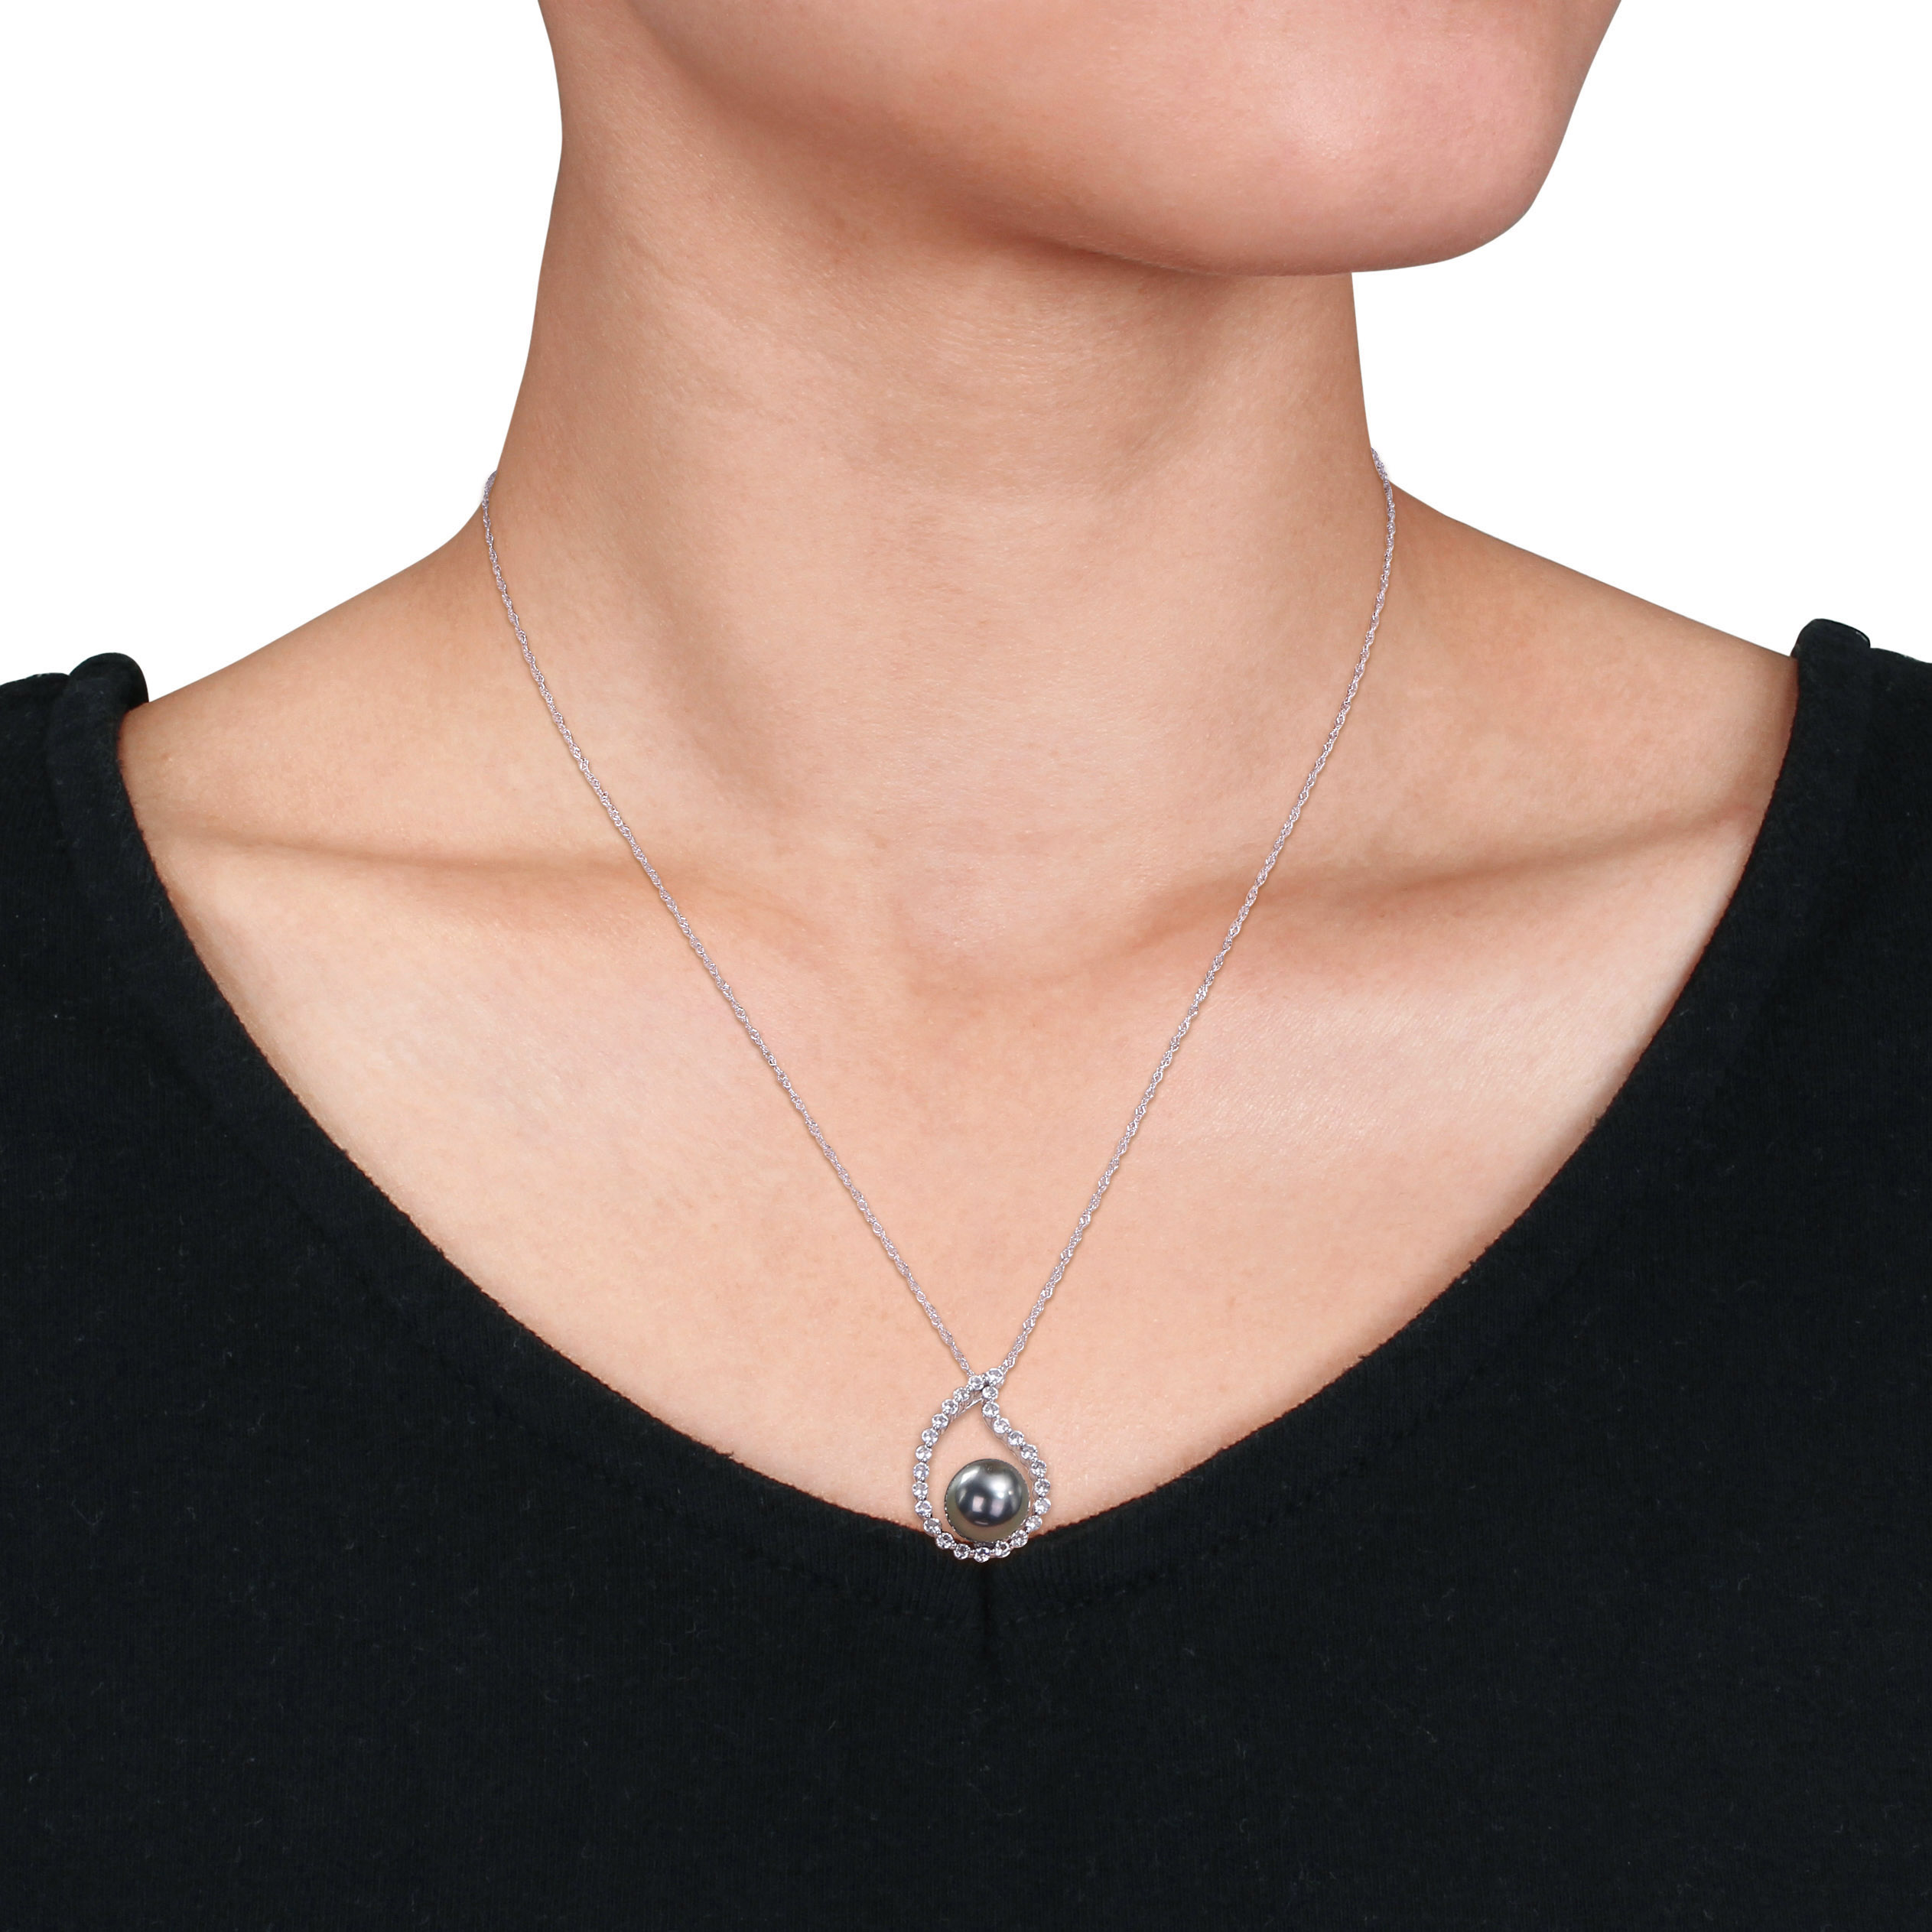 8-8.5 MM Black Tahitian Cultured Pearl and 3/8 CT TGW White Sapphire Teardrop Pendant with Chain in 10k White Gold